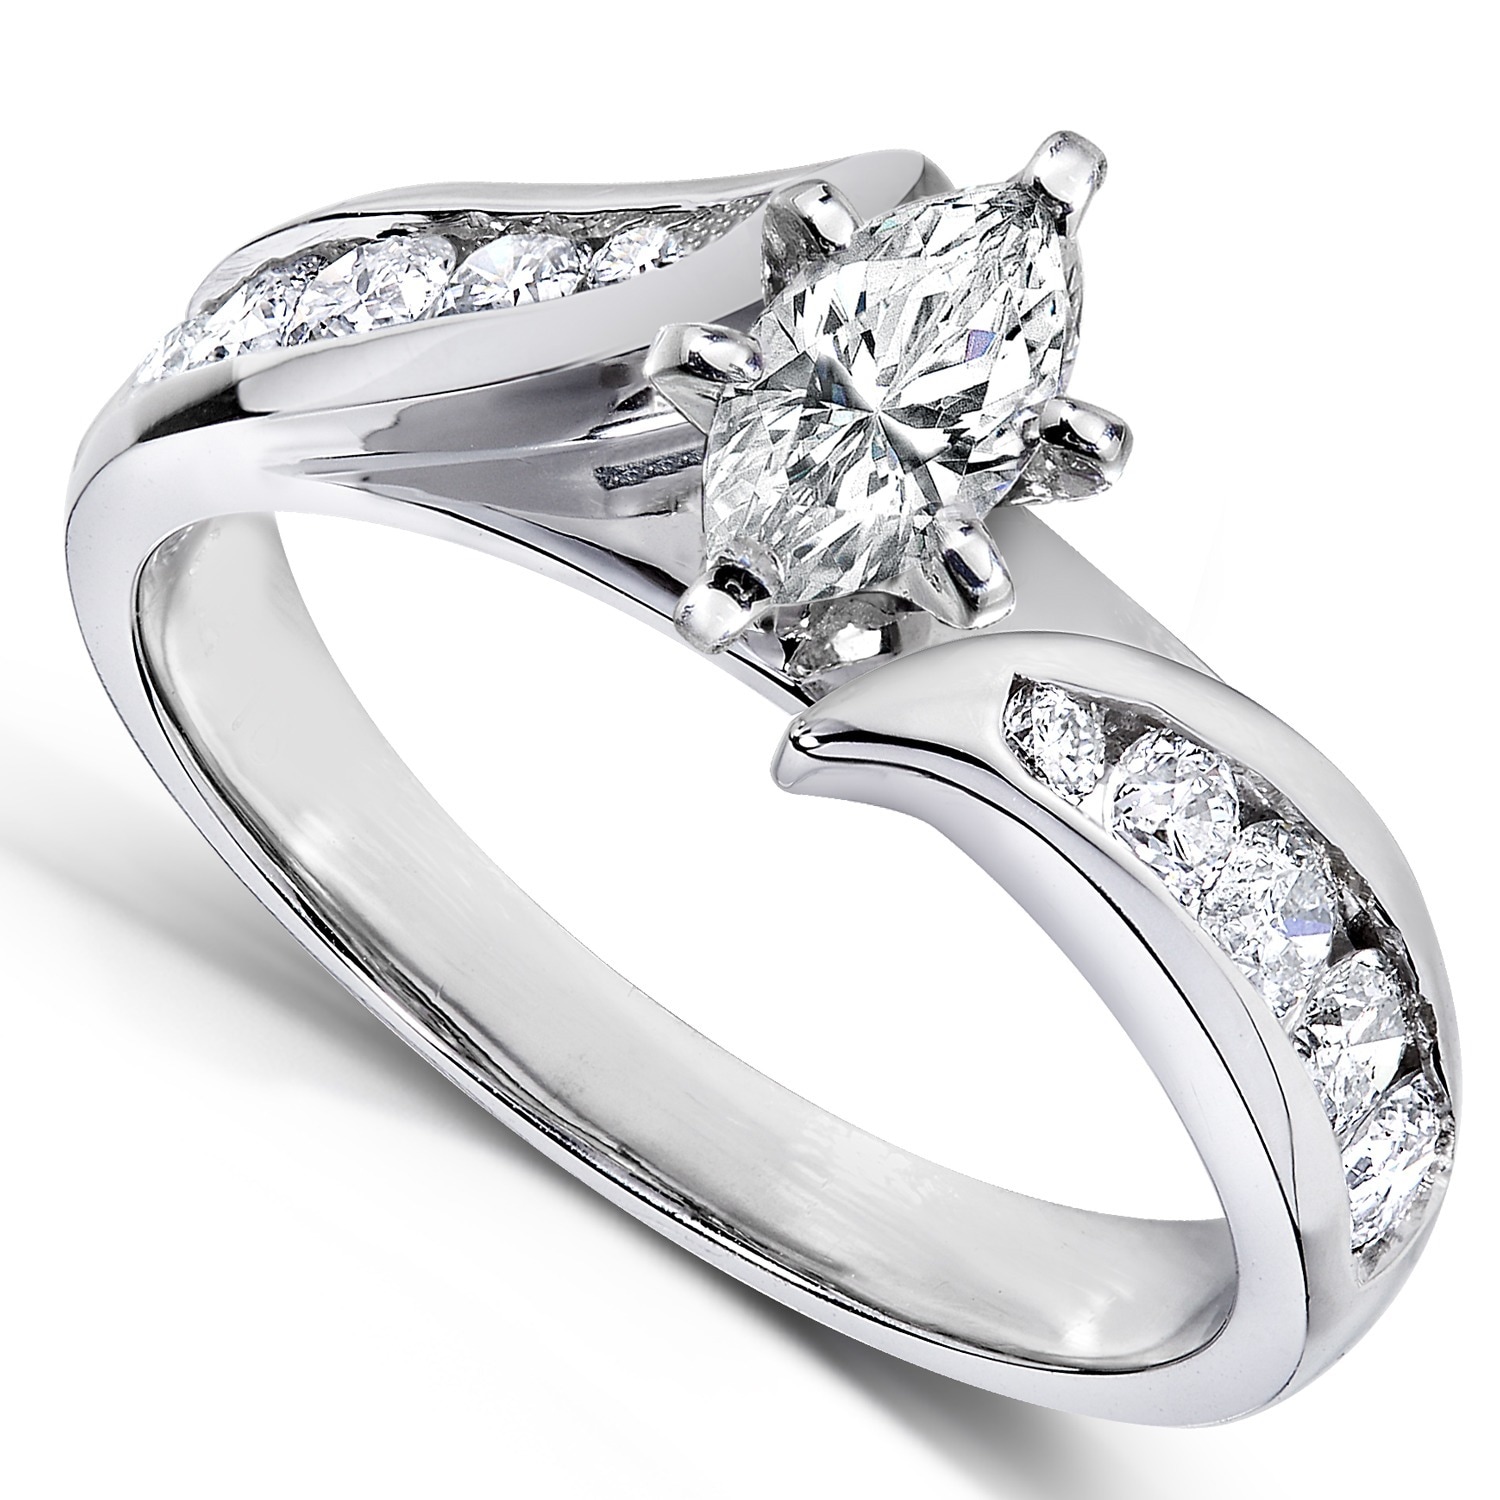 Annello by Kobelli 14k White Gold 1ct TDW Marquise Diamond Engagement Ring